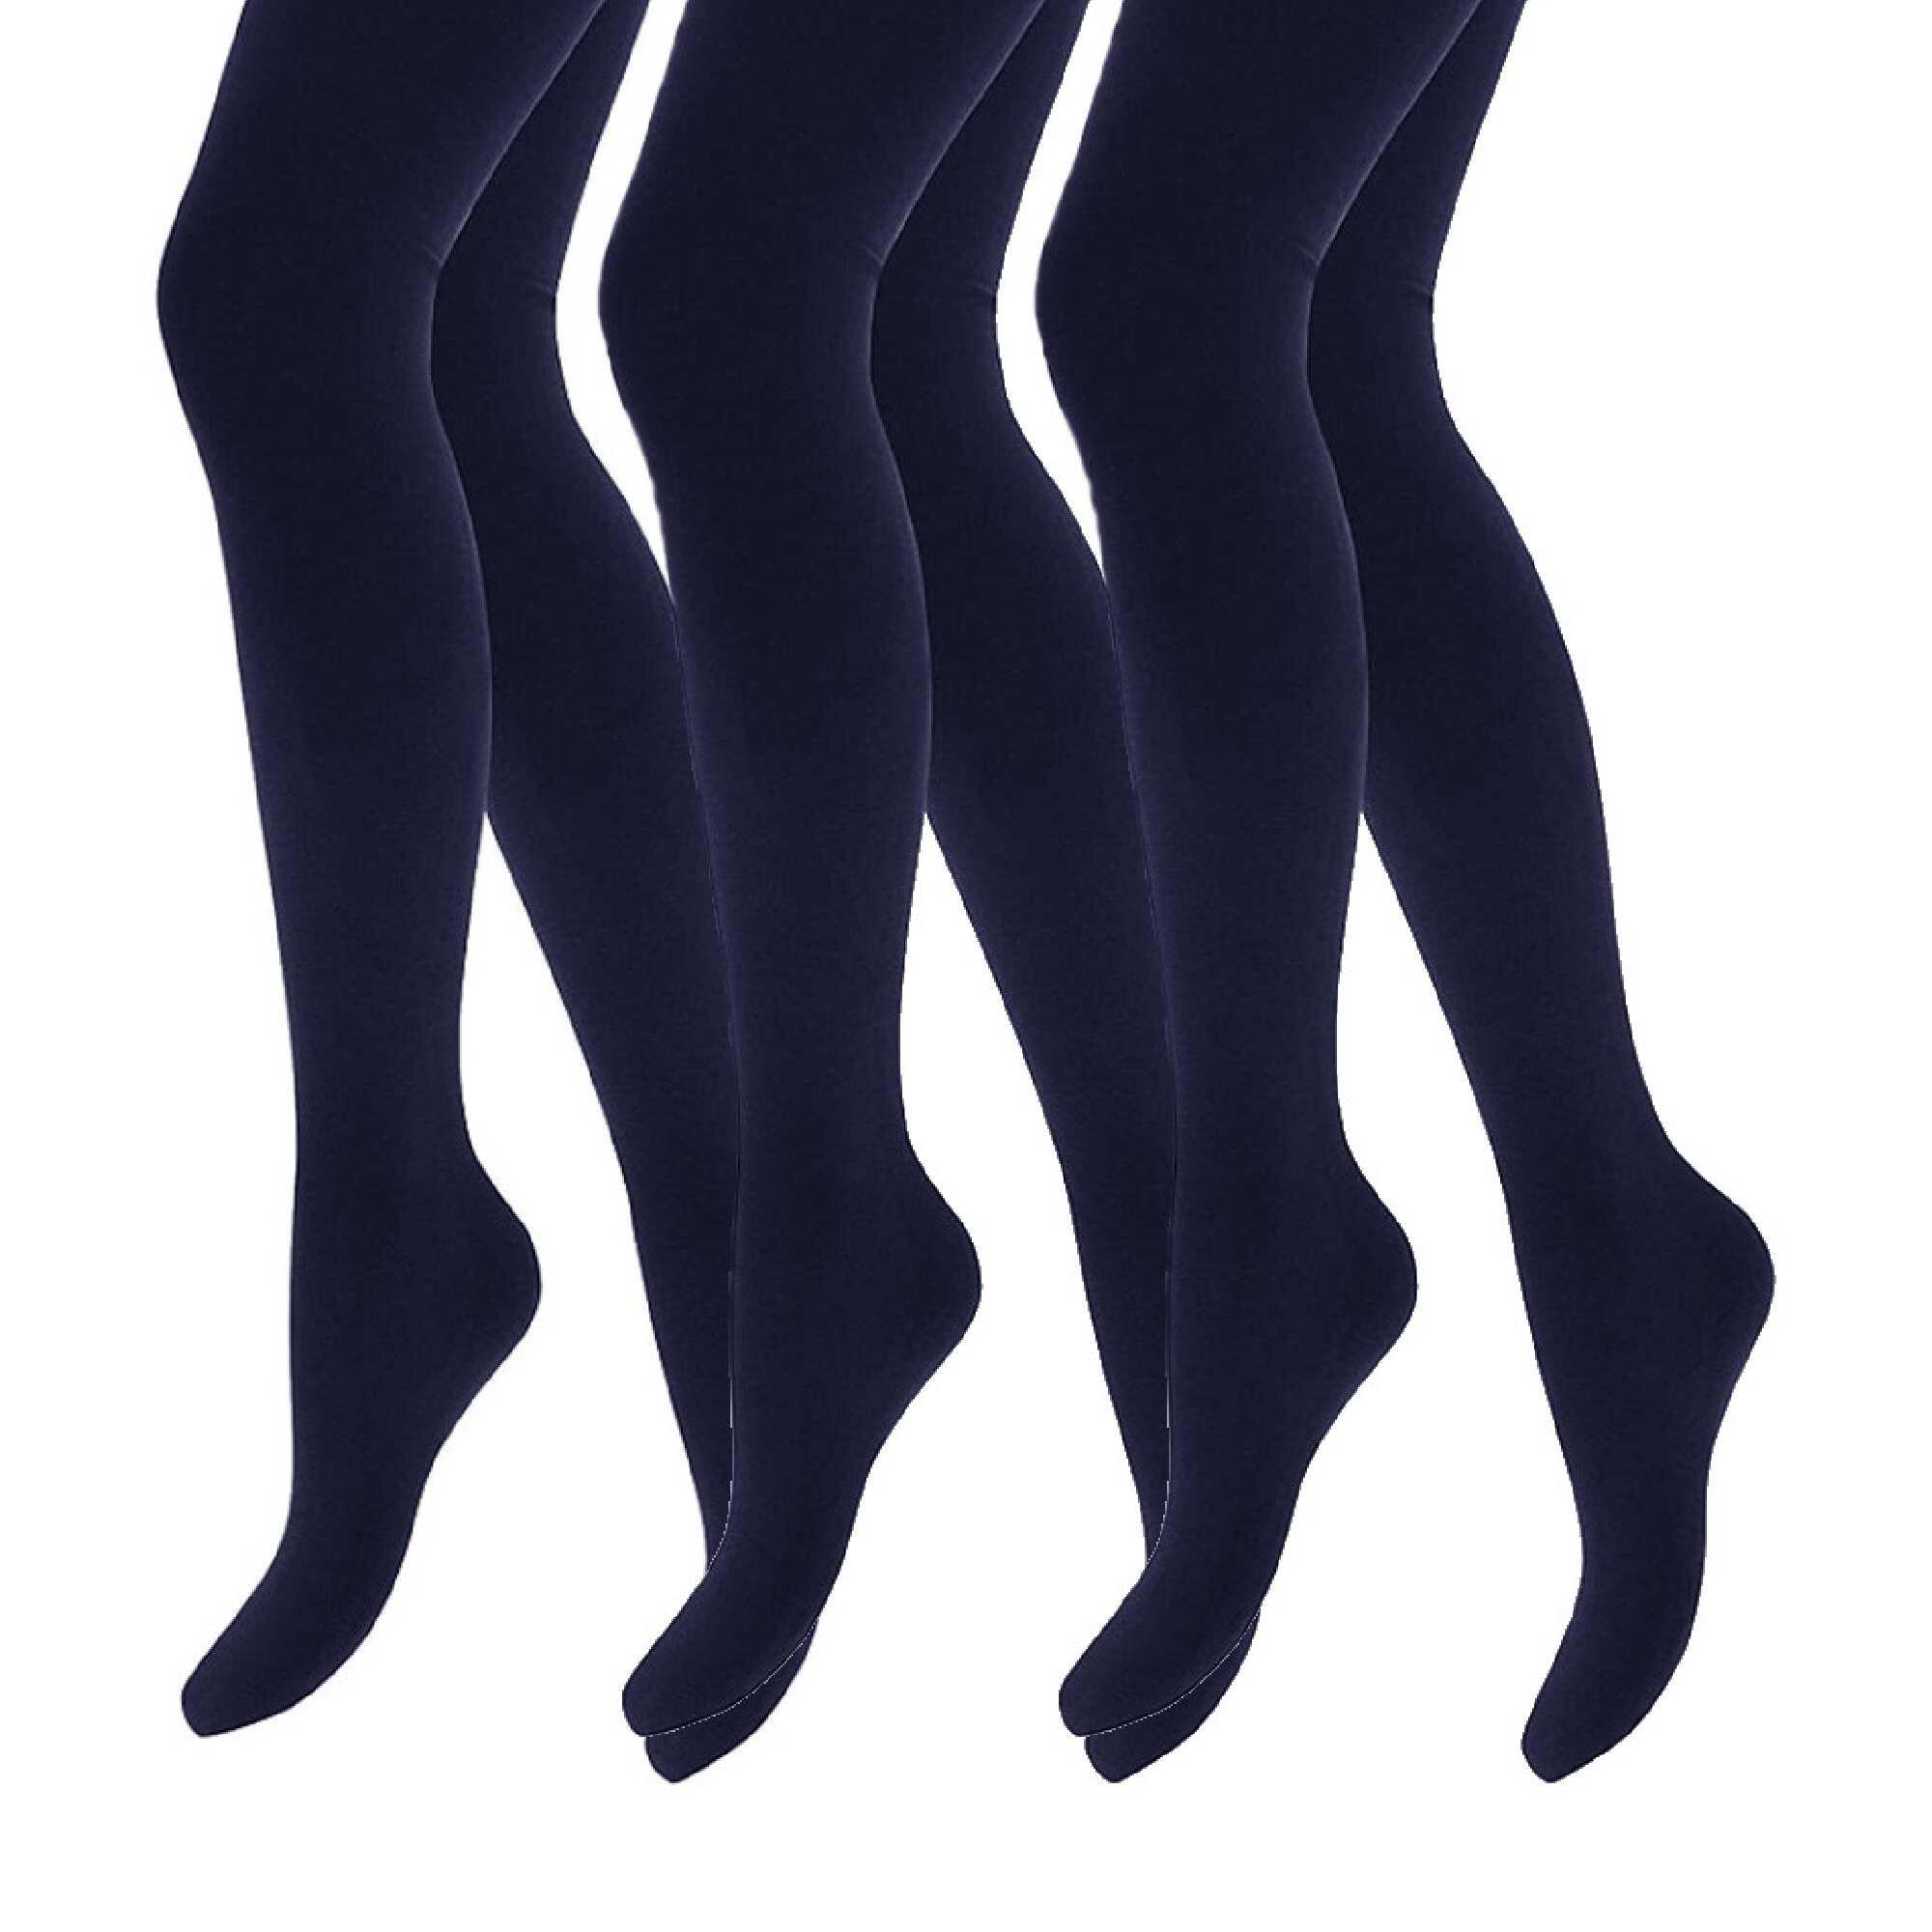 HEAT HOLDERS 3 Pair Multipack Girls Fleece Lined Opaque Thermal Tights for Winter